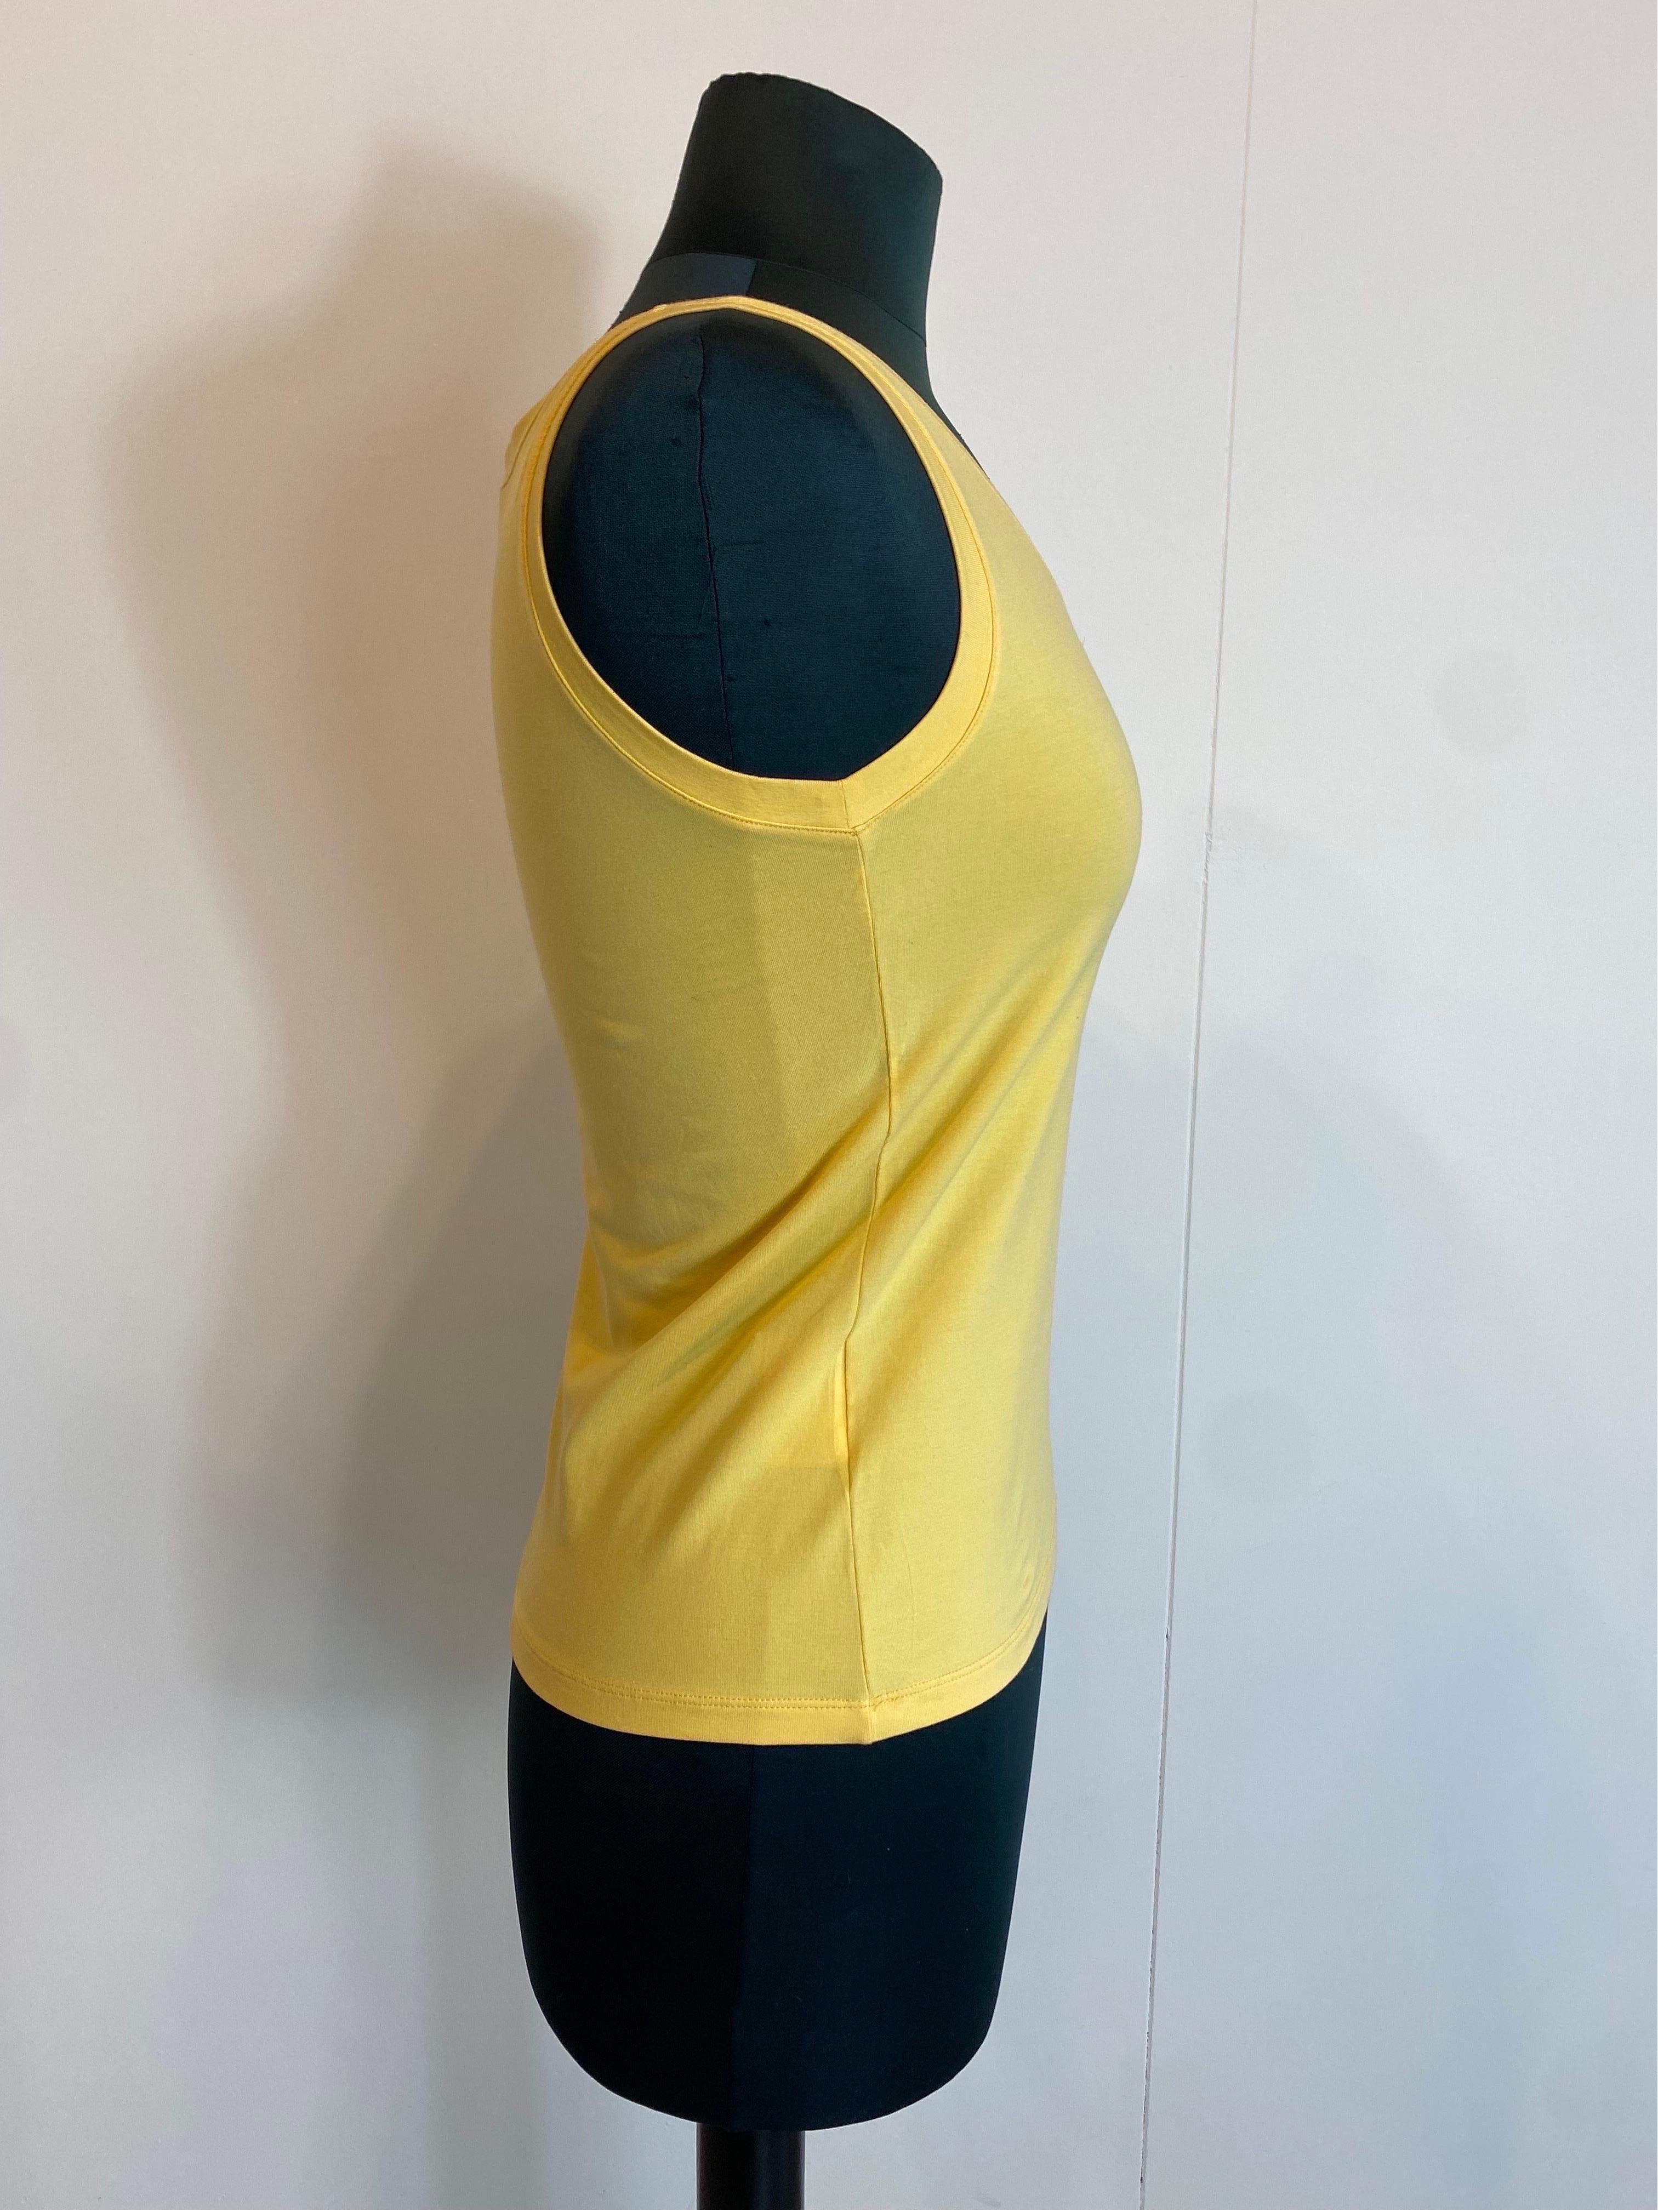 Prada yellow Top In Excellent Condition For Sale In Carnate, IT